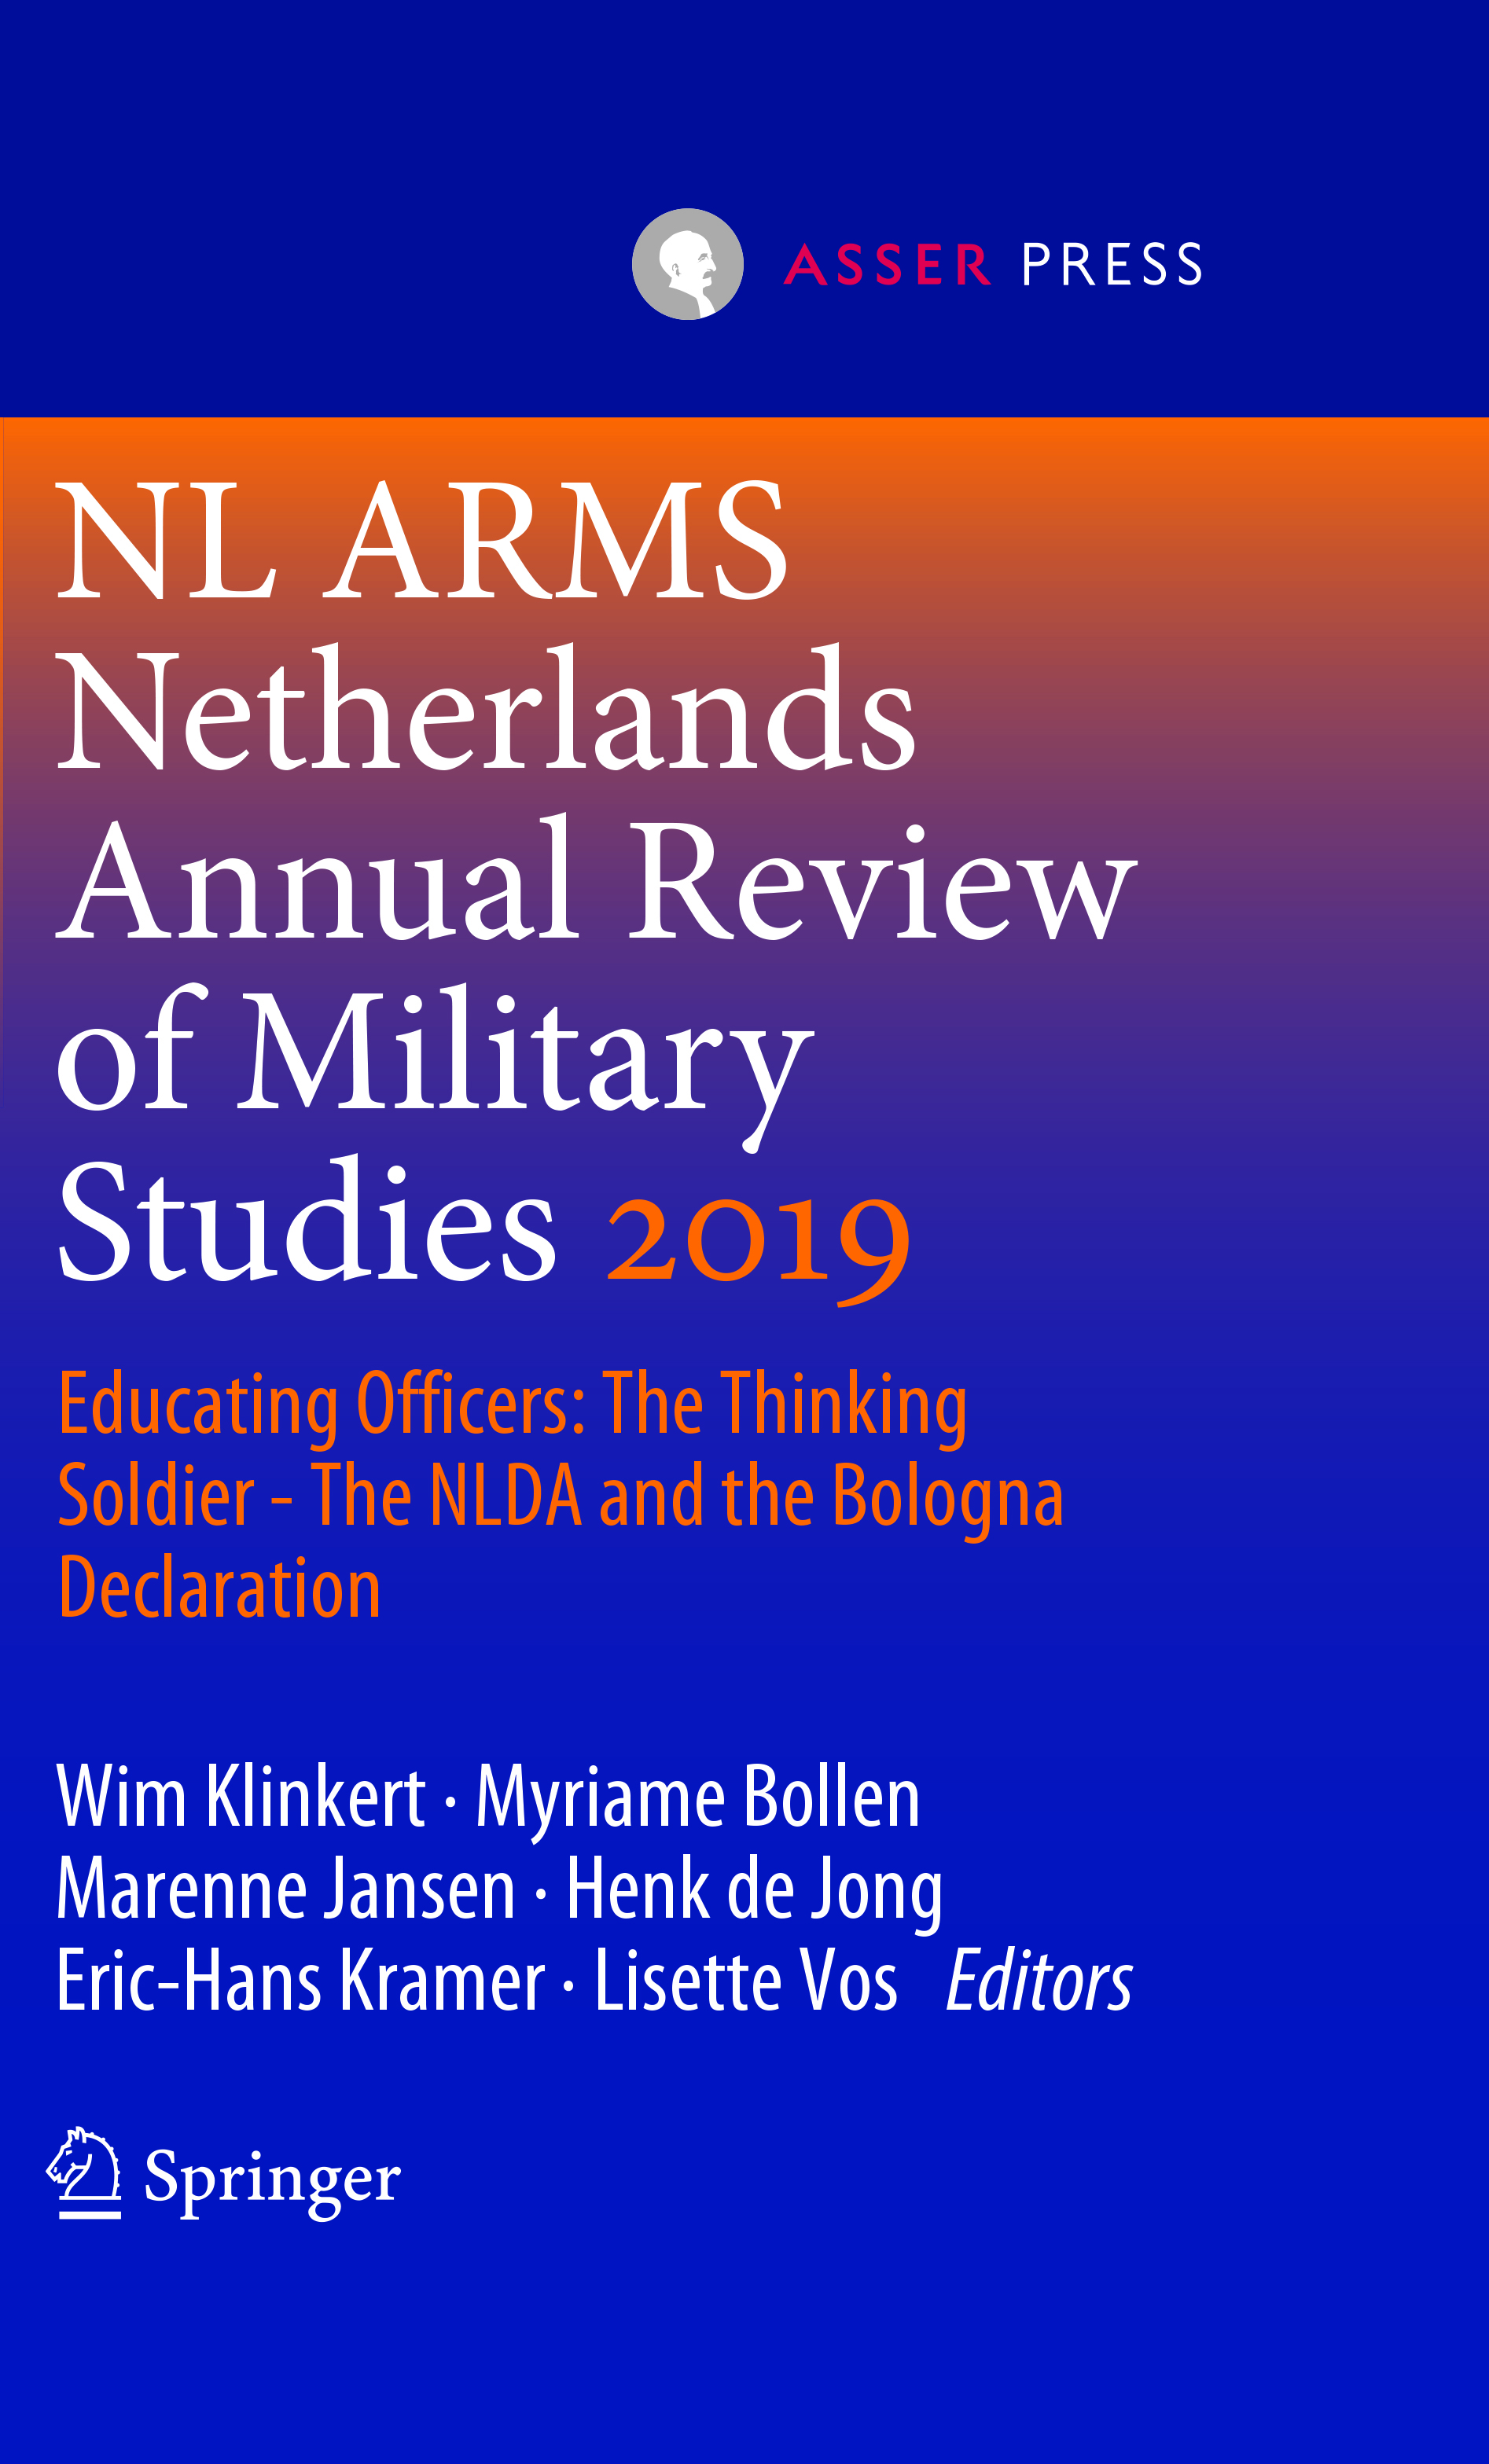 NL ARMS 2019 - Educating Officers: The Thinking Soldier - The NLDA and the Bologna Declaration